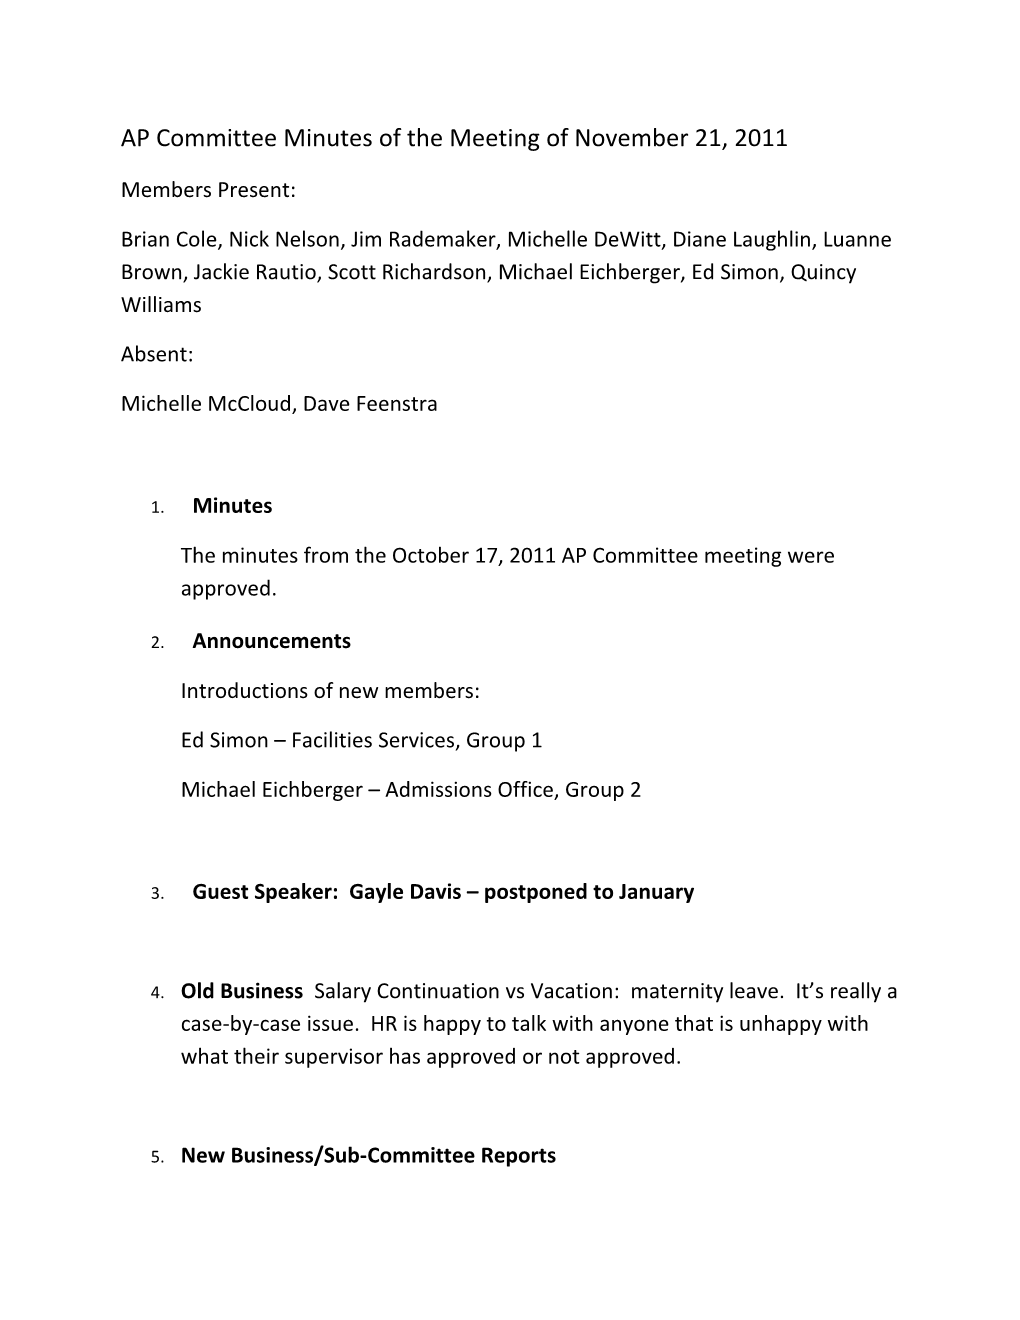 AP Committee Minutes of the Meeting of November 21, 2011